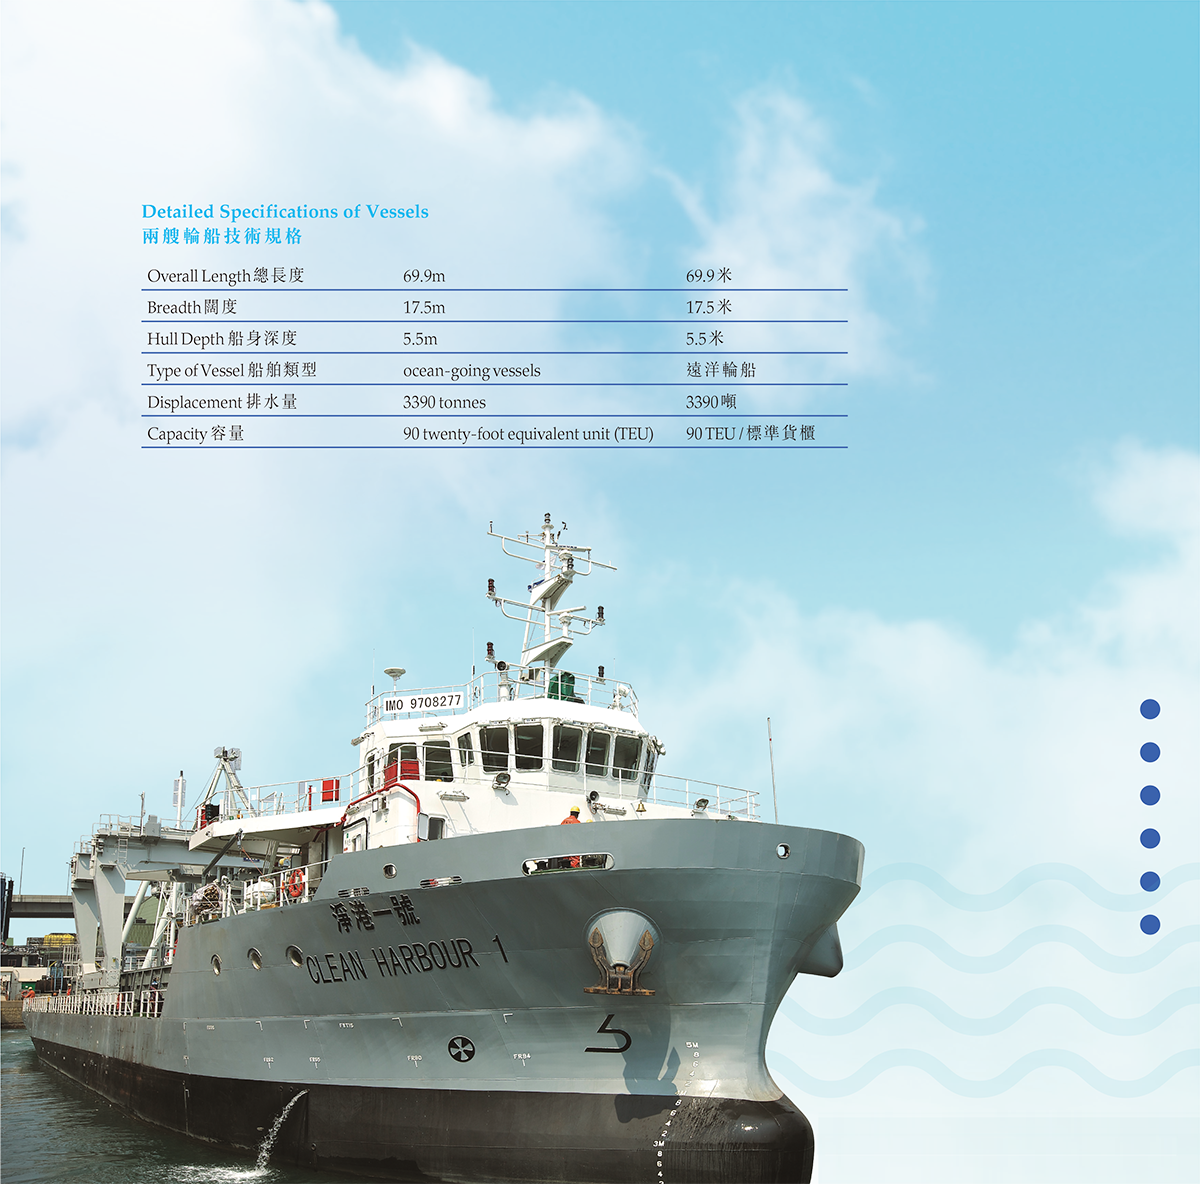 Detailed Specifications of Vessels